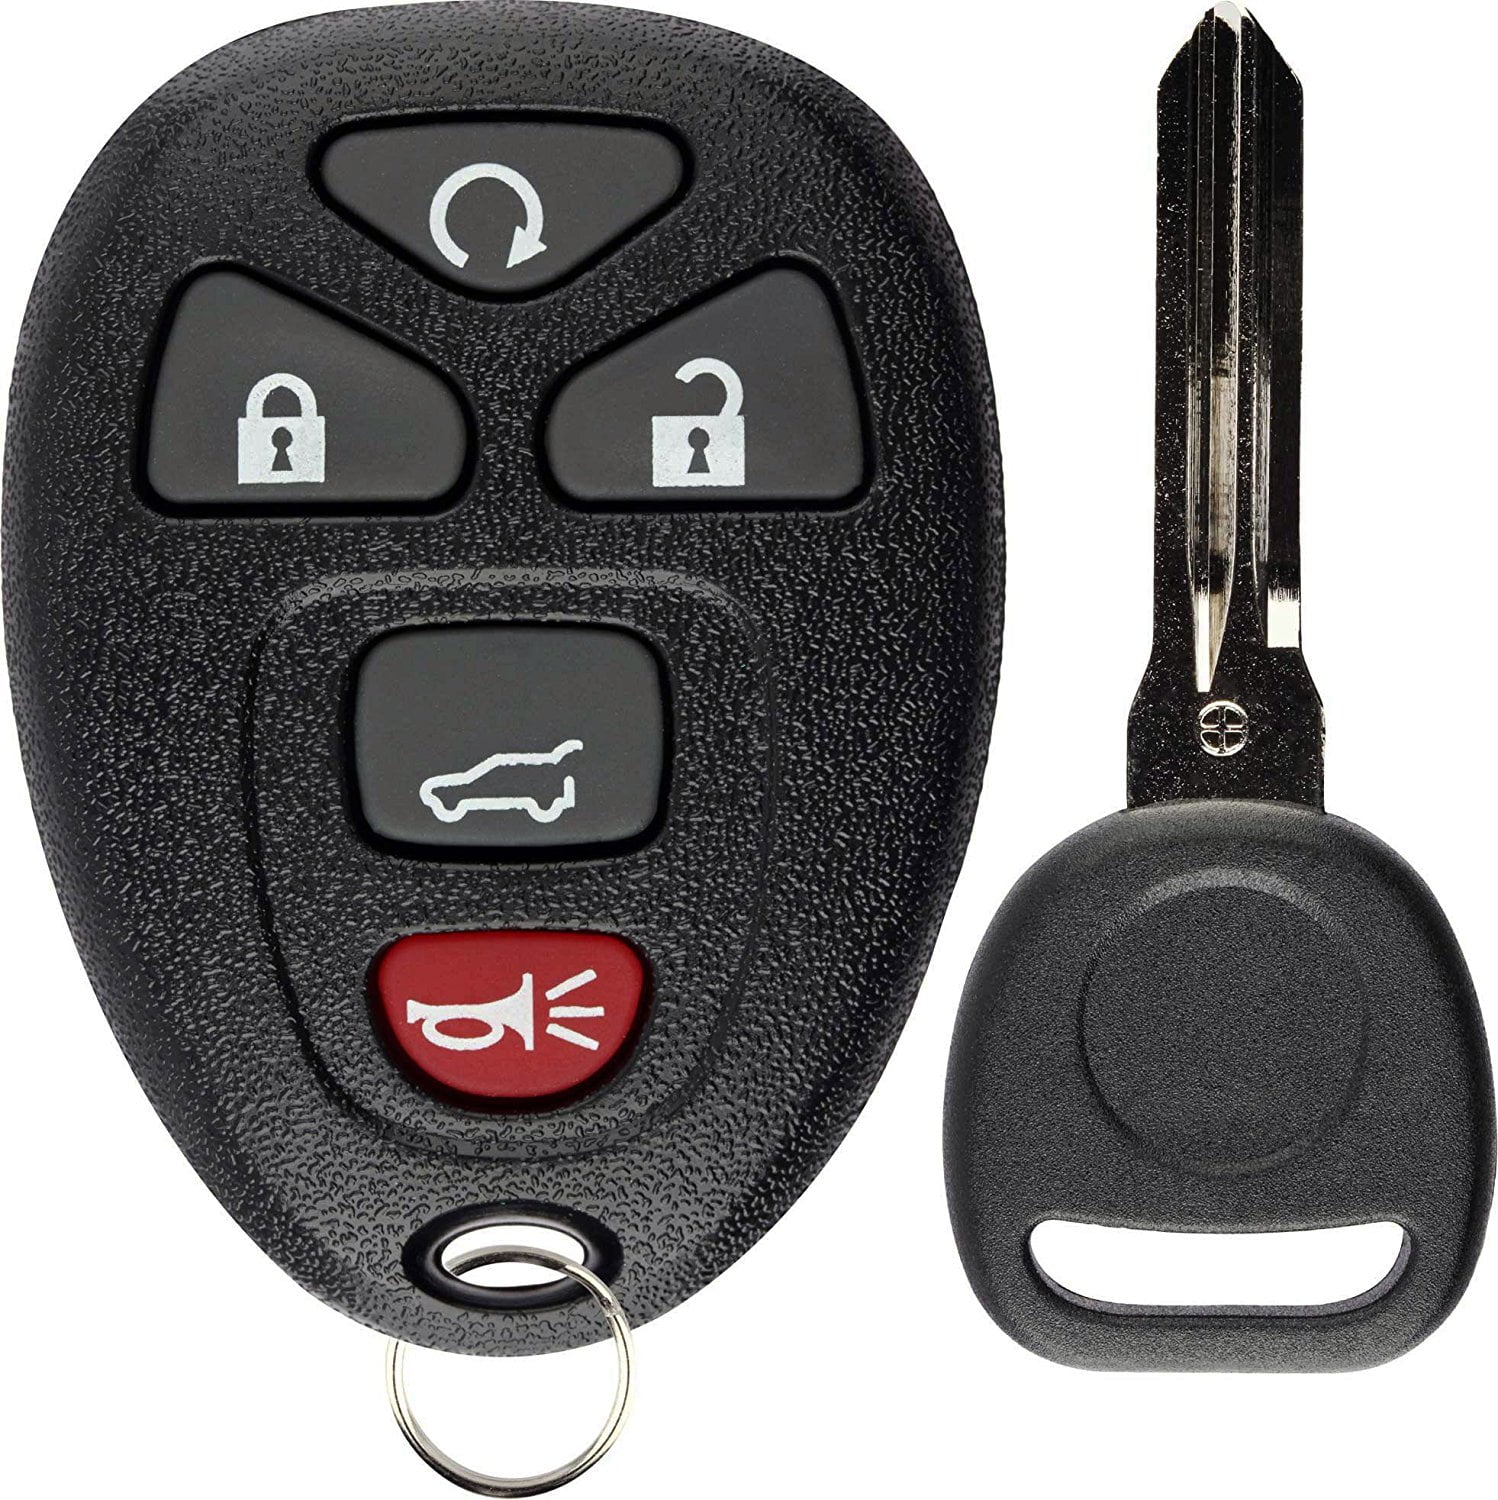 Replacement Keyless Entry Remote Car Auto Key Fob For 2004 2005 Toyota Details about   Qty 2 